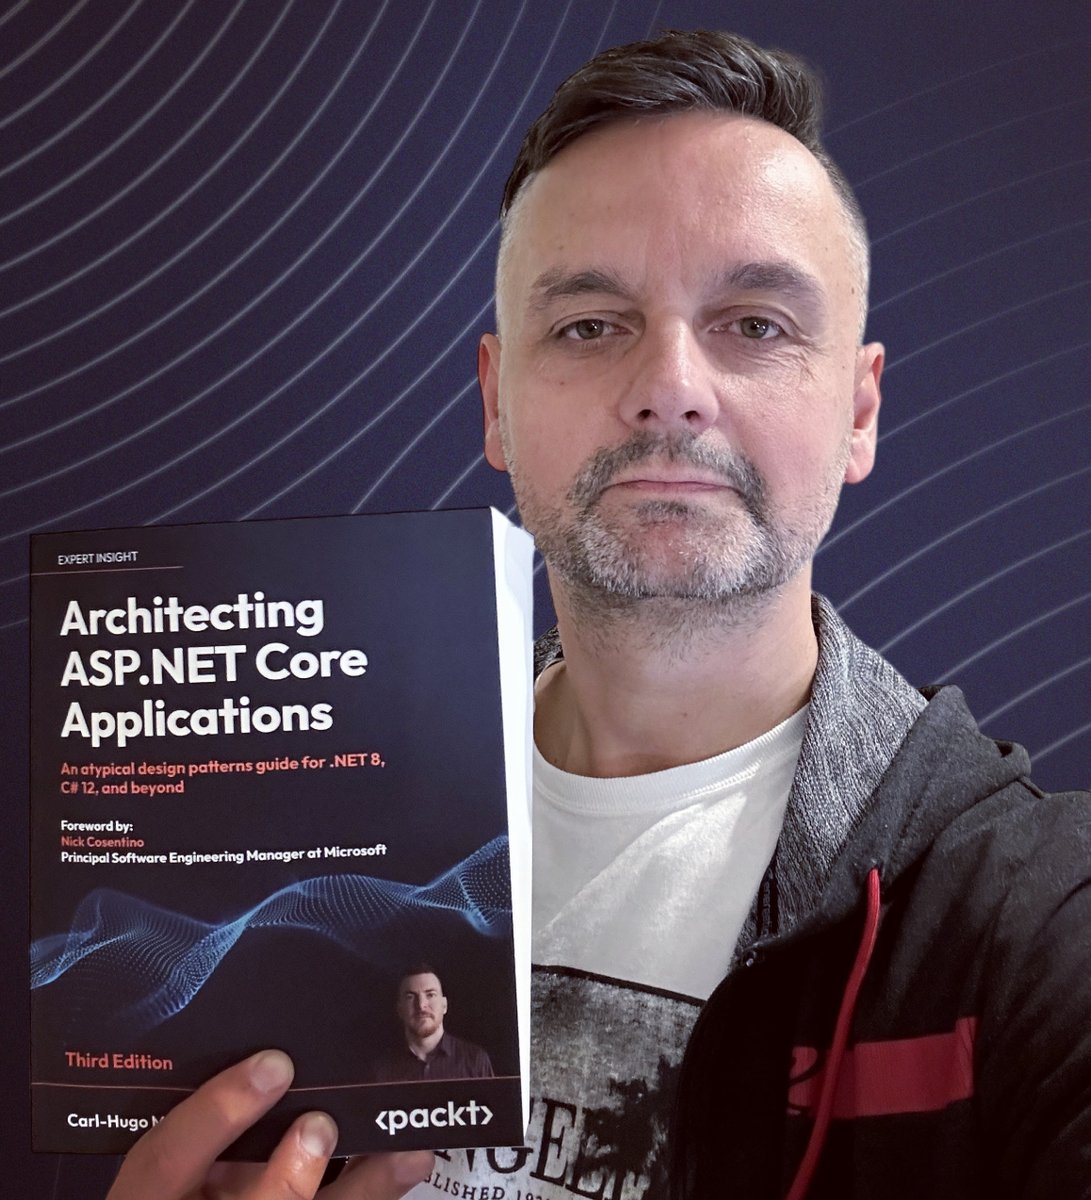 Just received my copy of 'Architecting ASP.NET Core Applications - Third Edition' by @CarlHugoM, and I couldn't be more excited! 📚 This book is a gem for developers like me who are passionate about .NET and C#. Thank you @PacktPublishing, thank you @ps848338 !